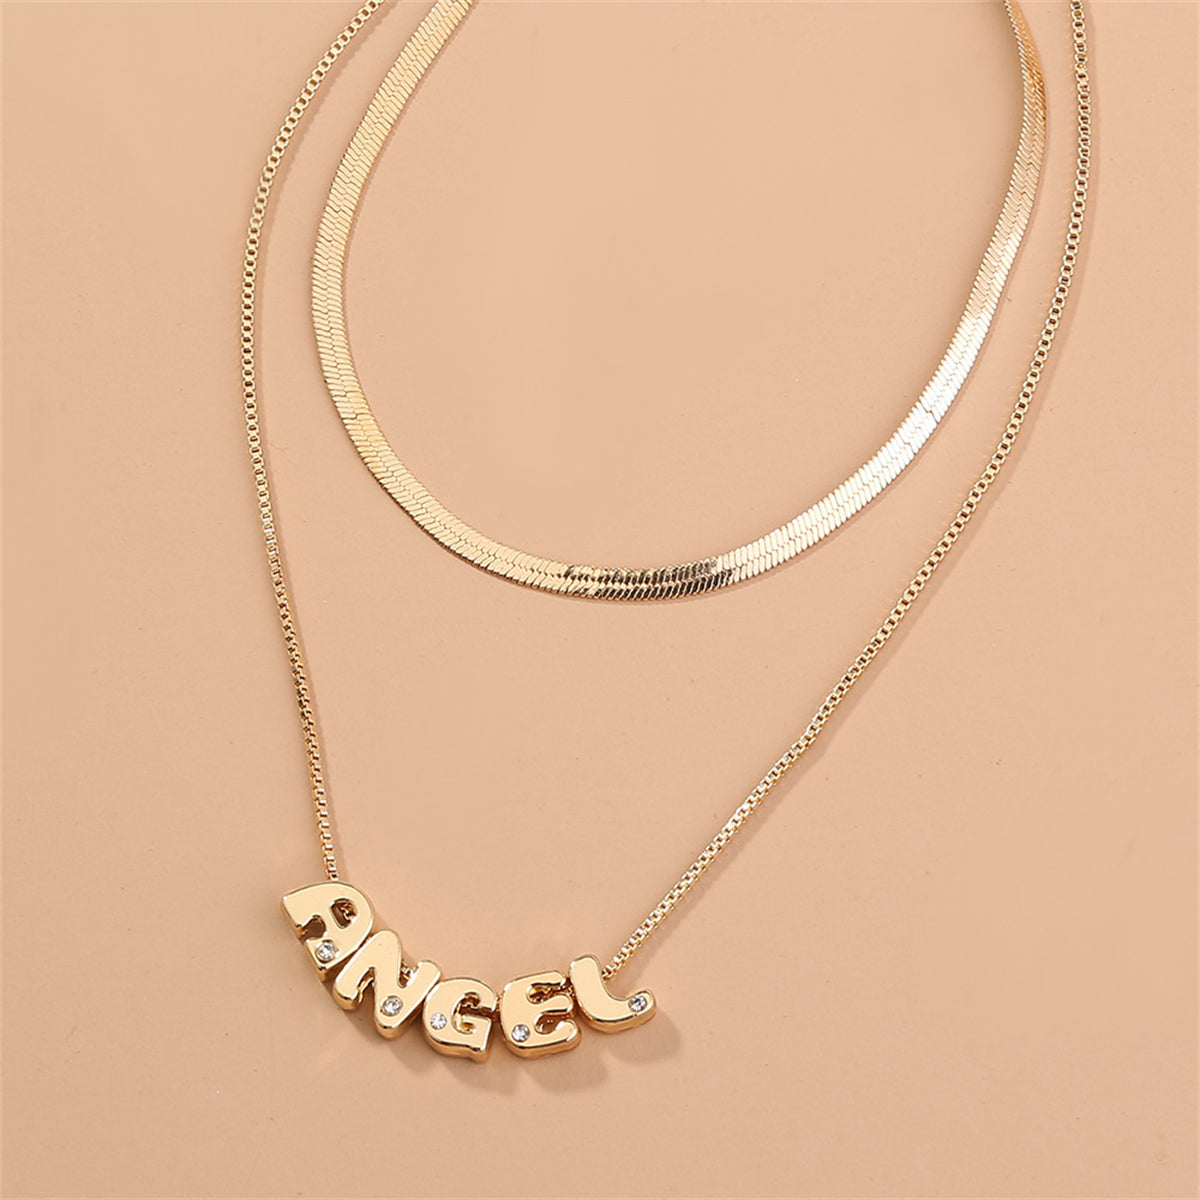 Cubic Zirconia & 18K Gold-Plated Snake Chain 'Angel' Necklace Set